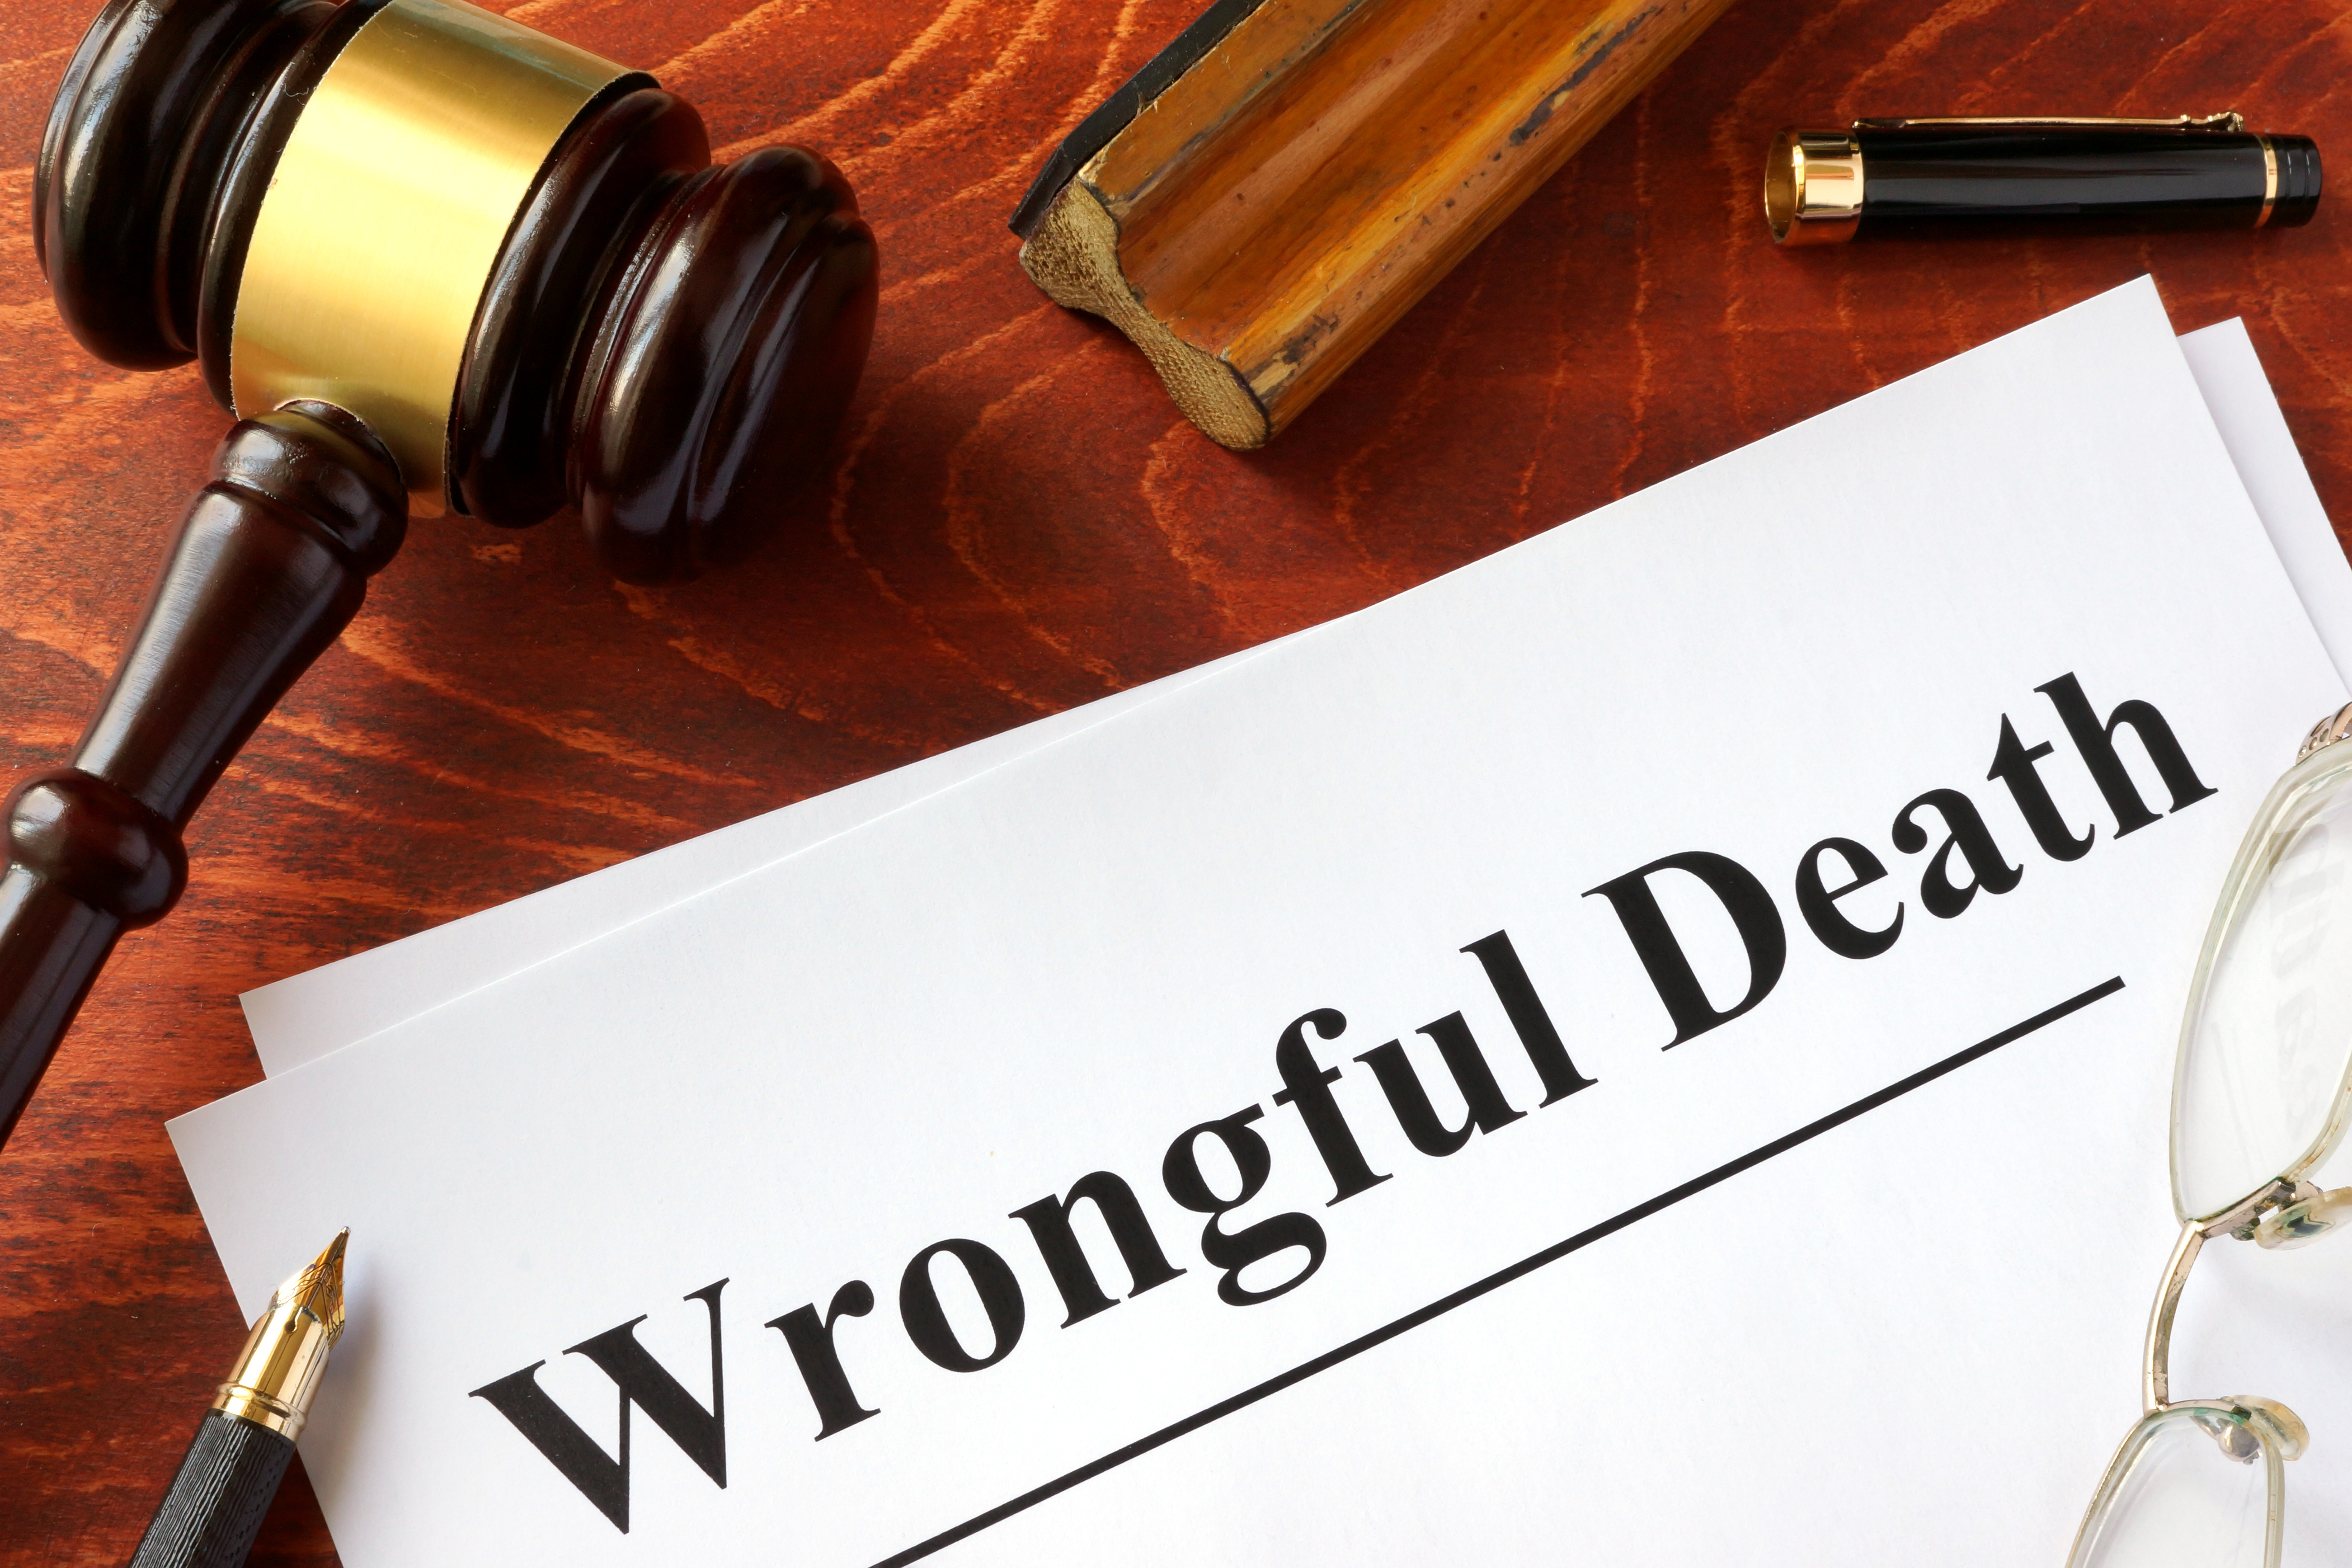 Court Document Titled Wrongful Death